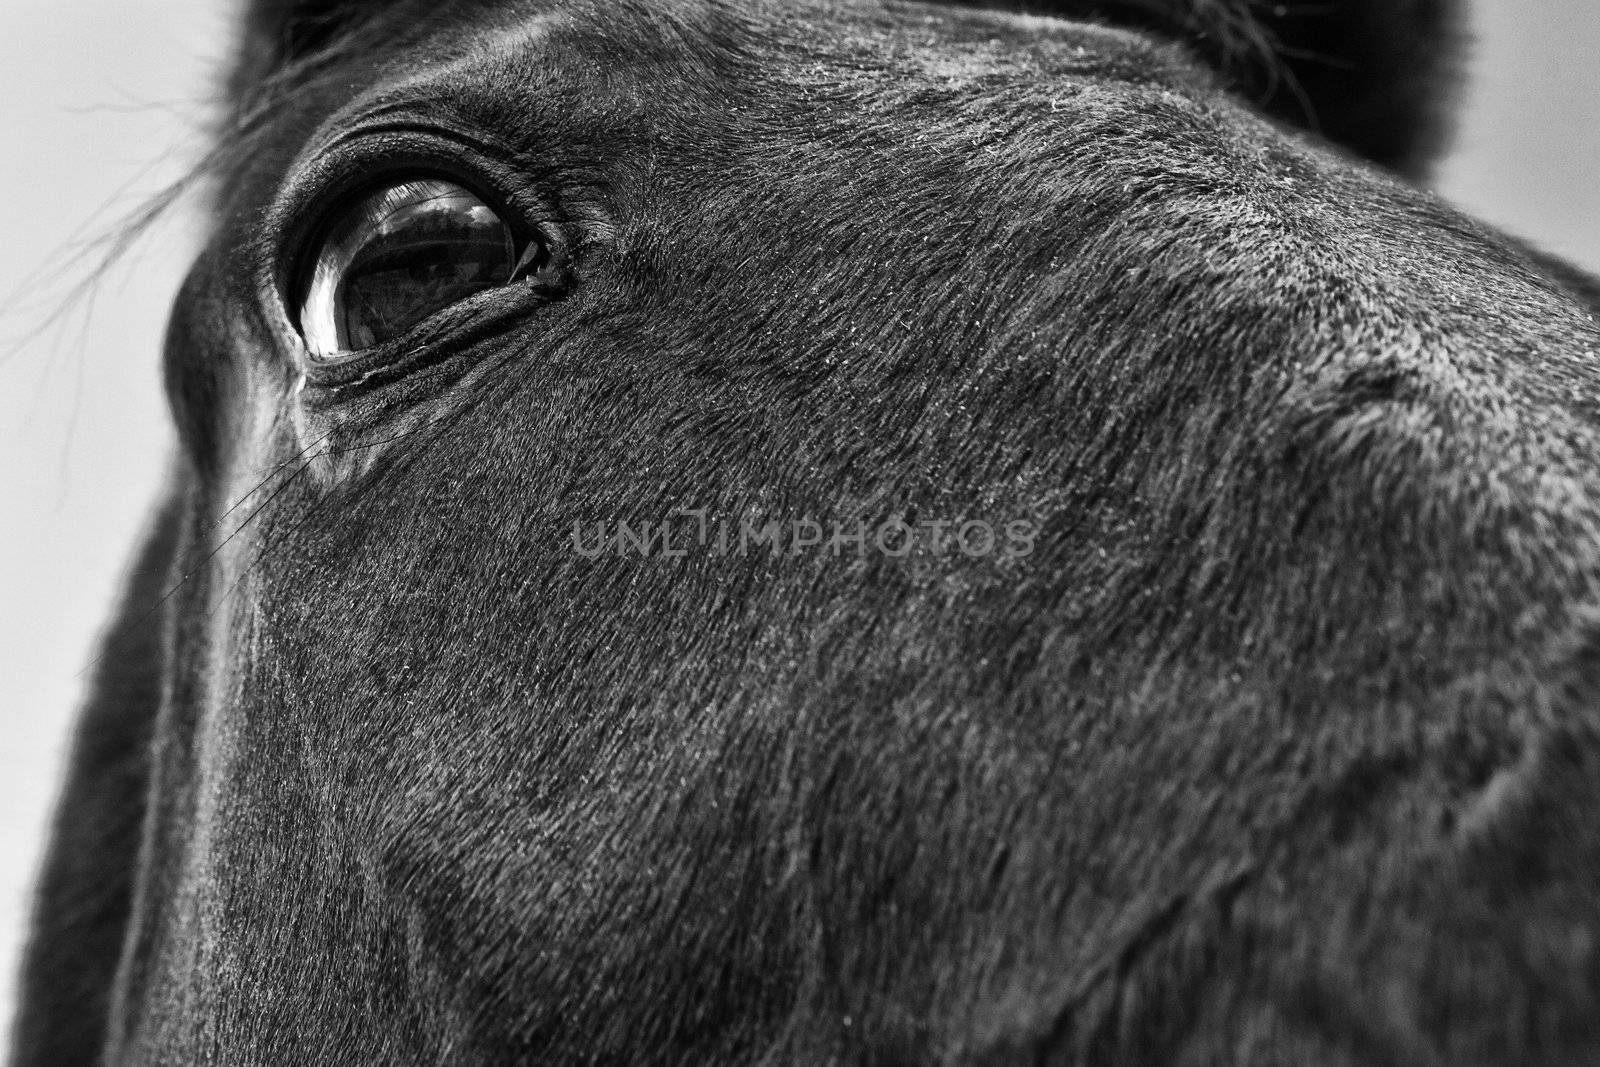 Eye of the Horse by PhotoWorks